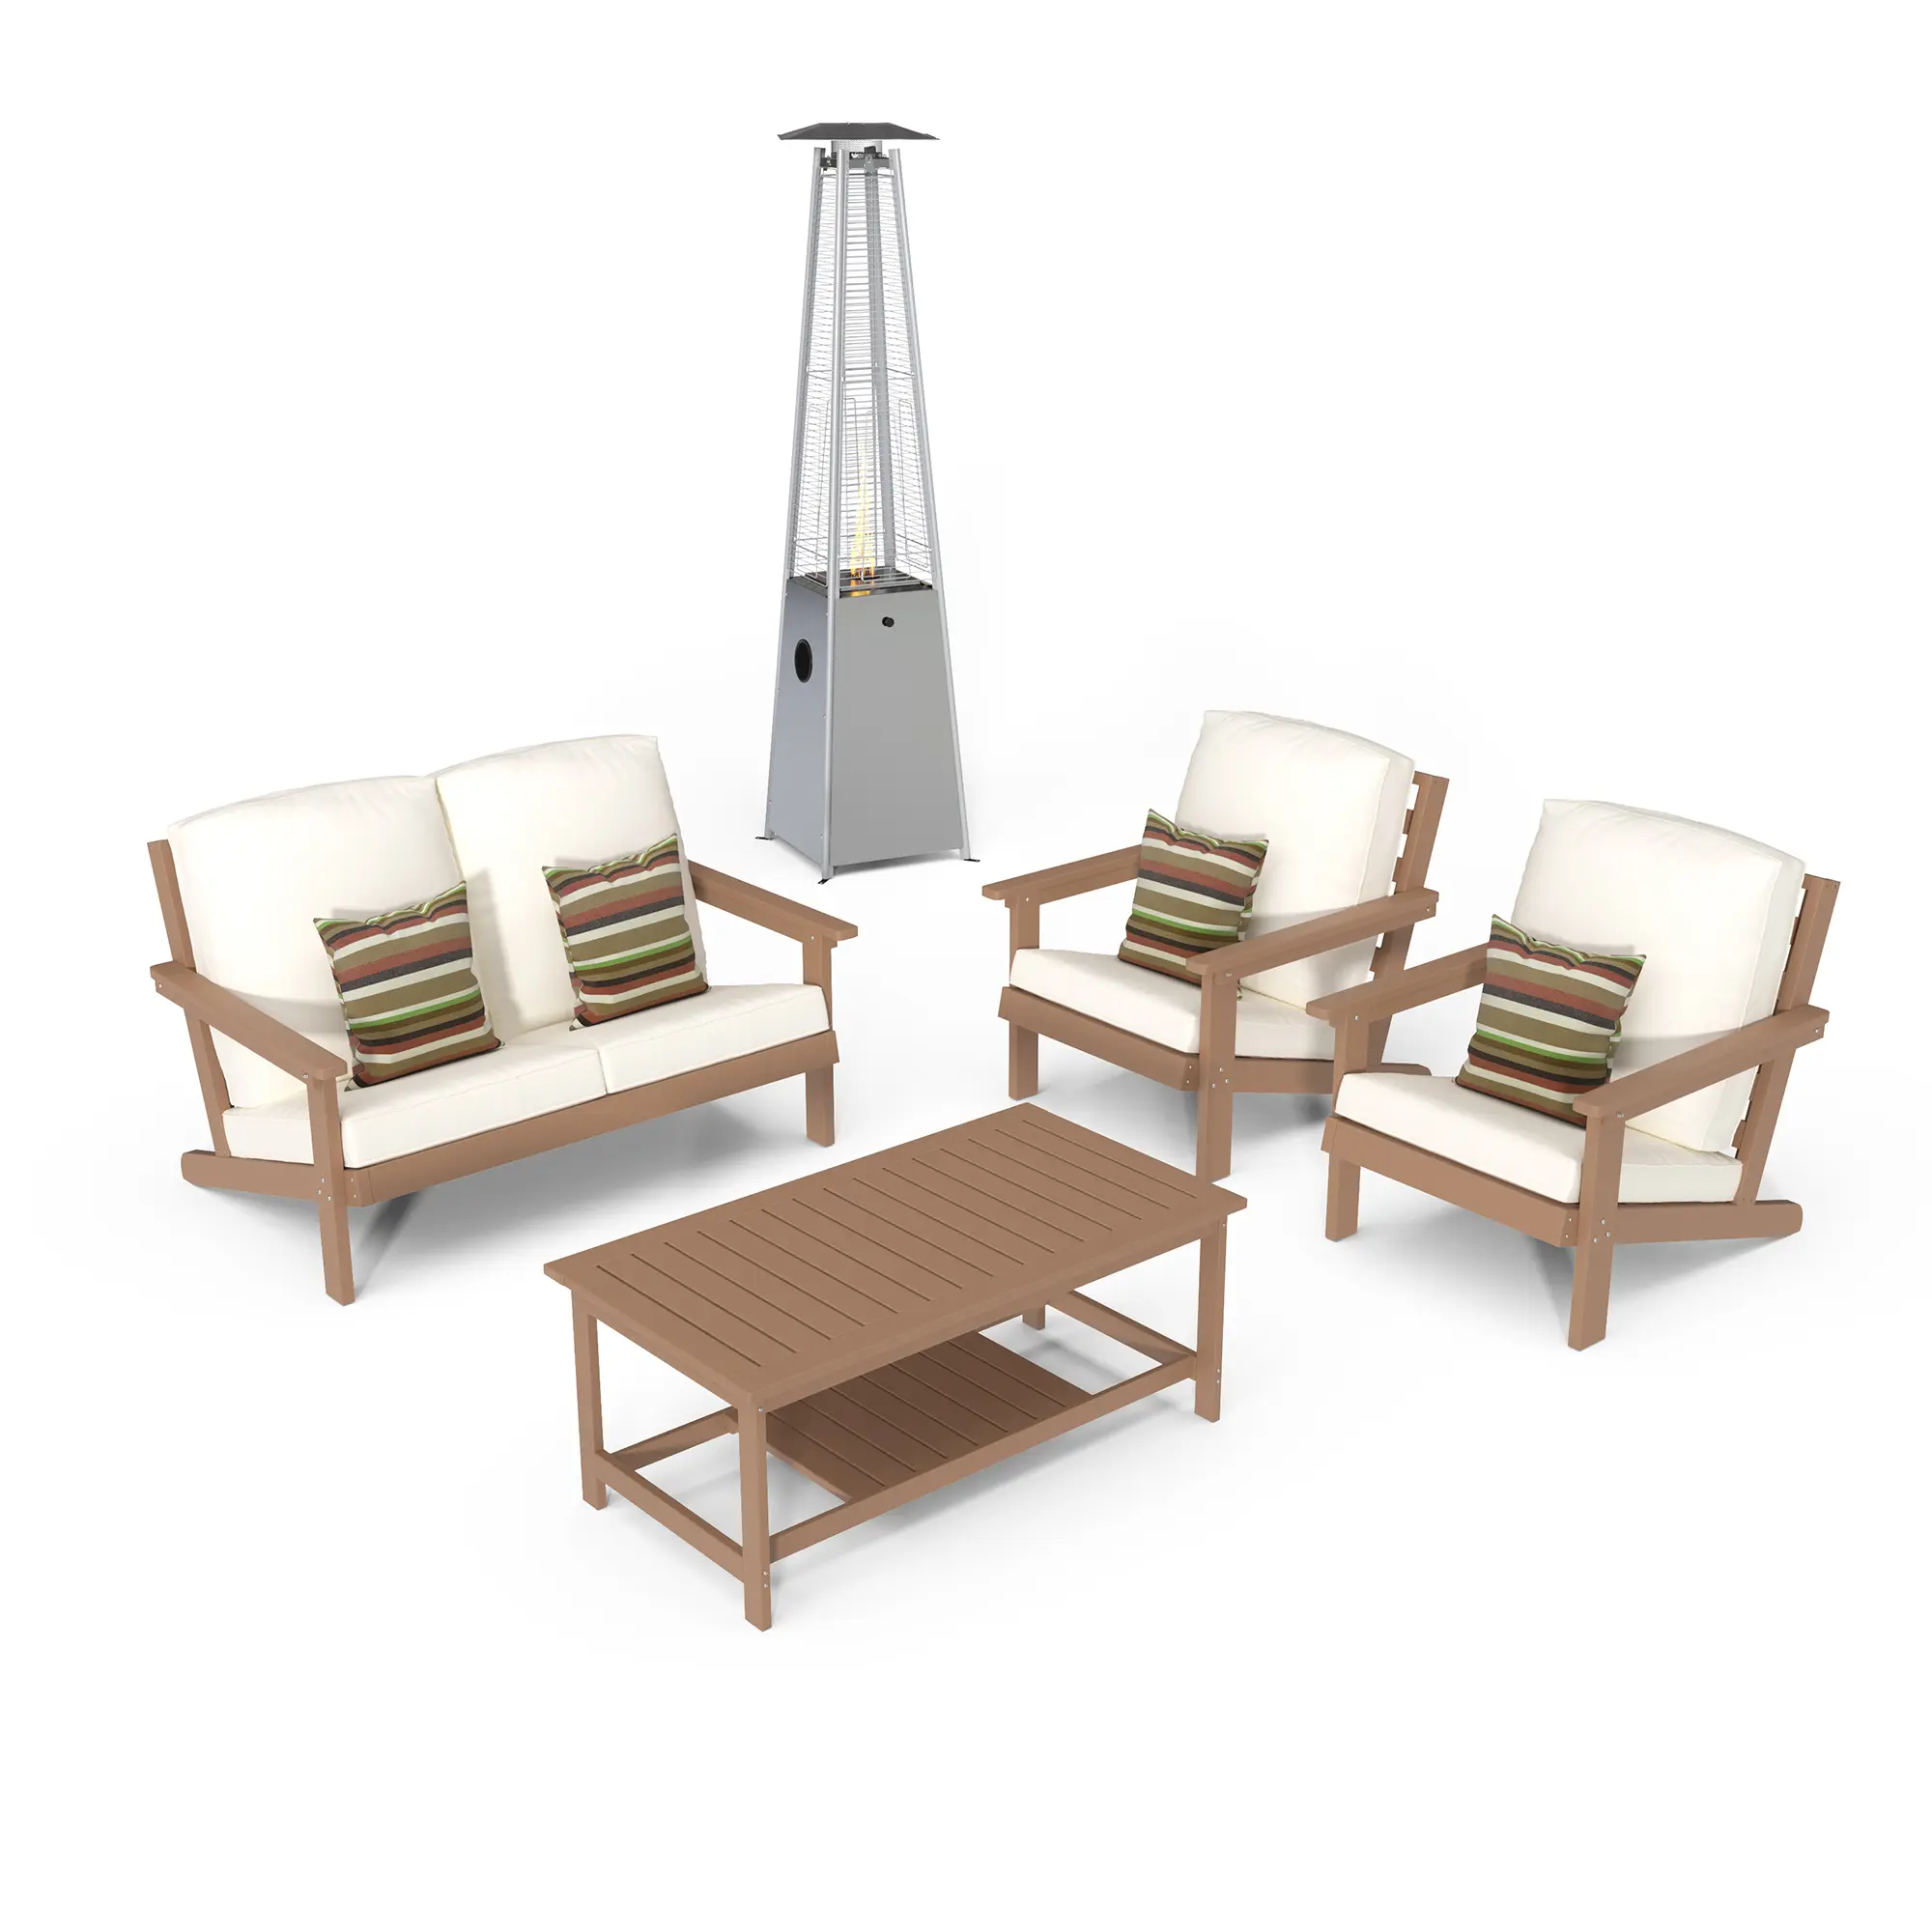 5-Piece Patio Lounge Set with 40000 BTU Propane Heater and Coffee Table